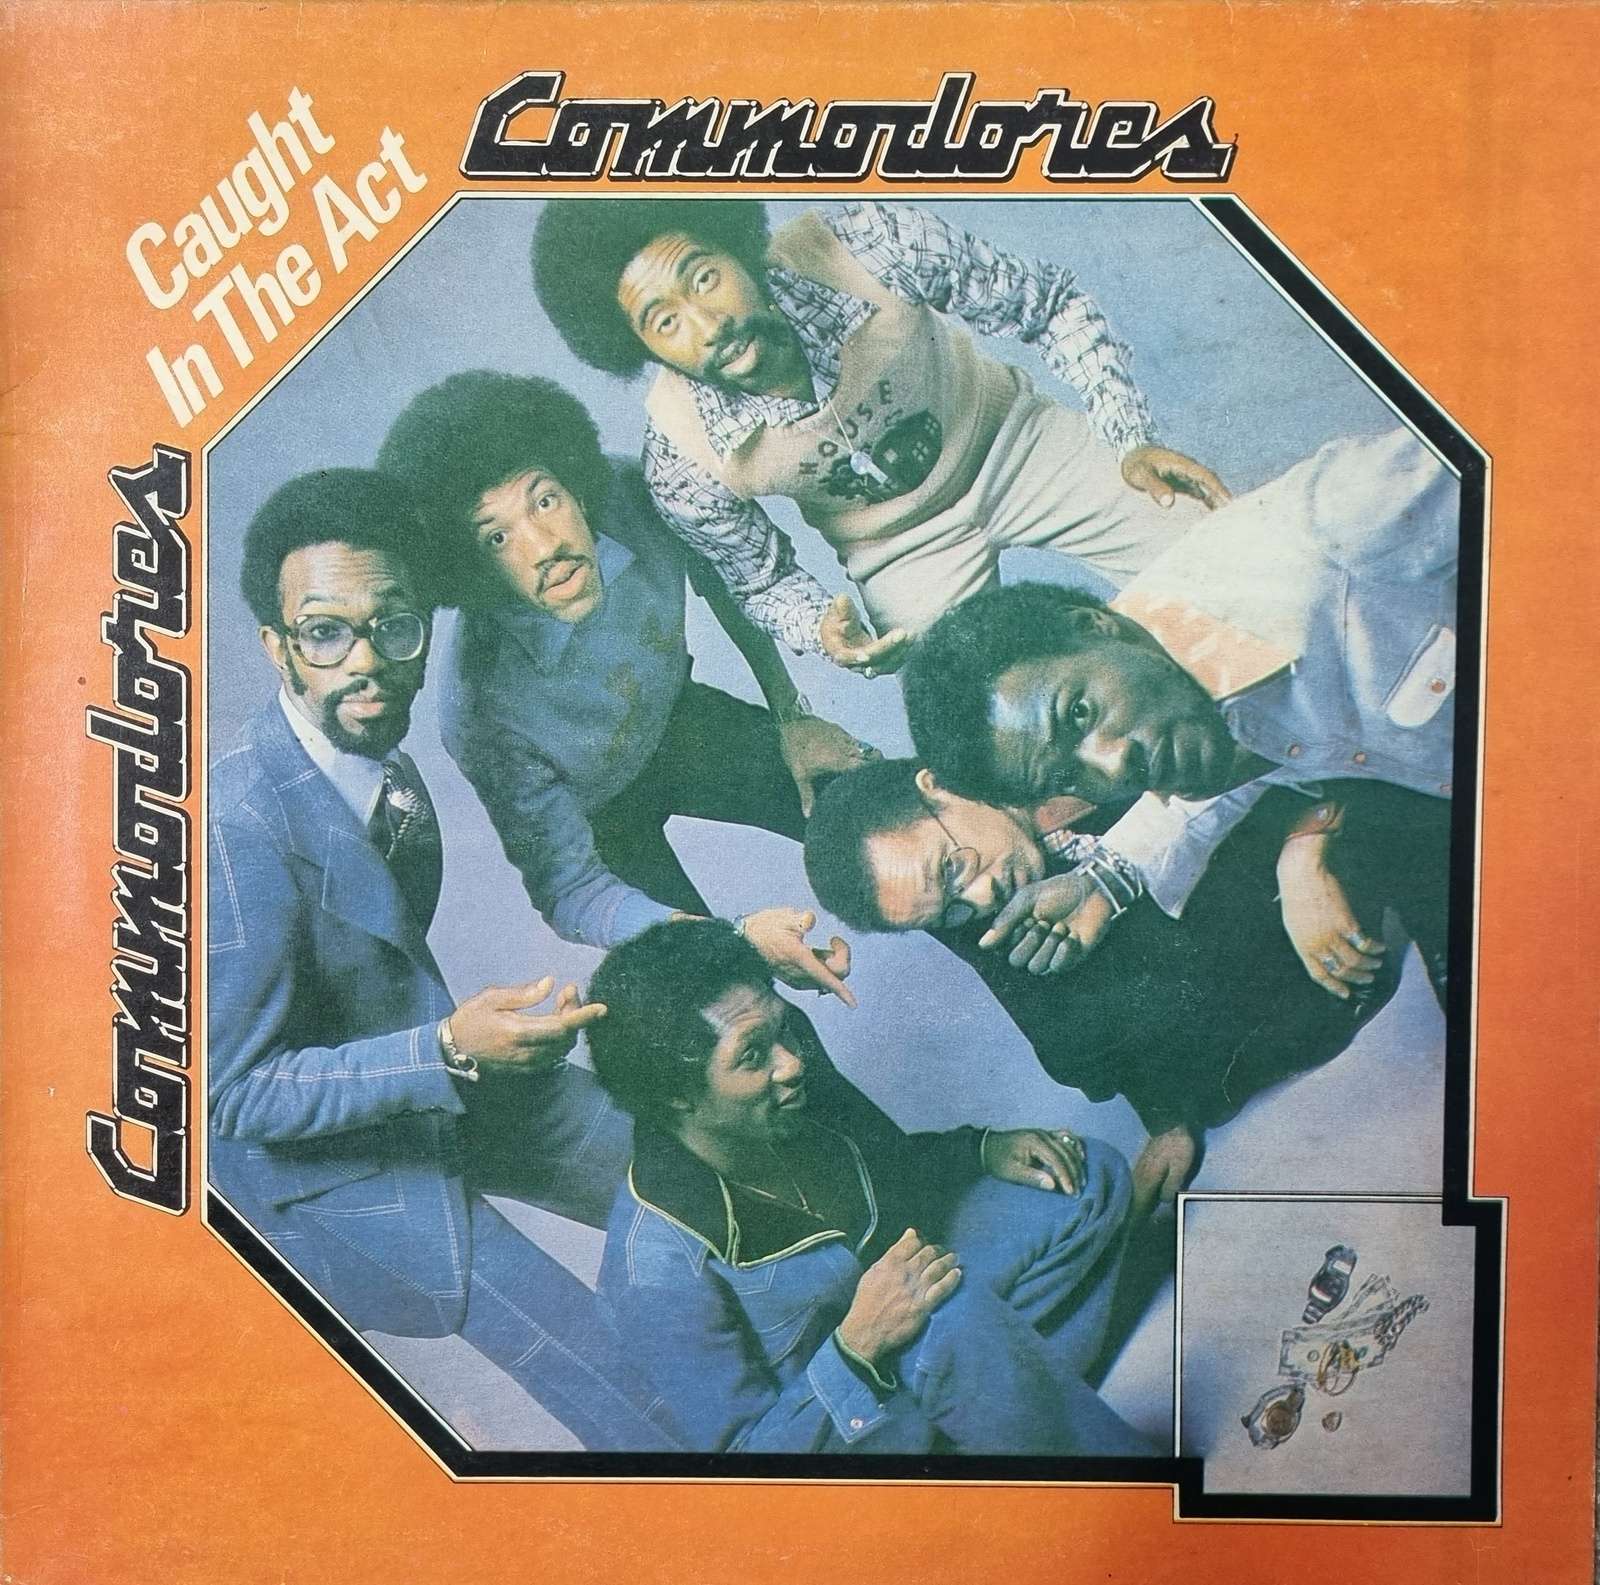 Commodores - Caught in the Act (LP)